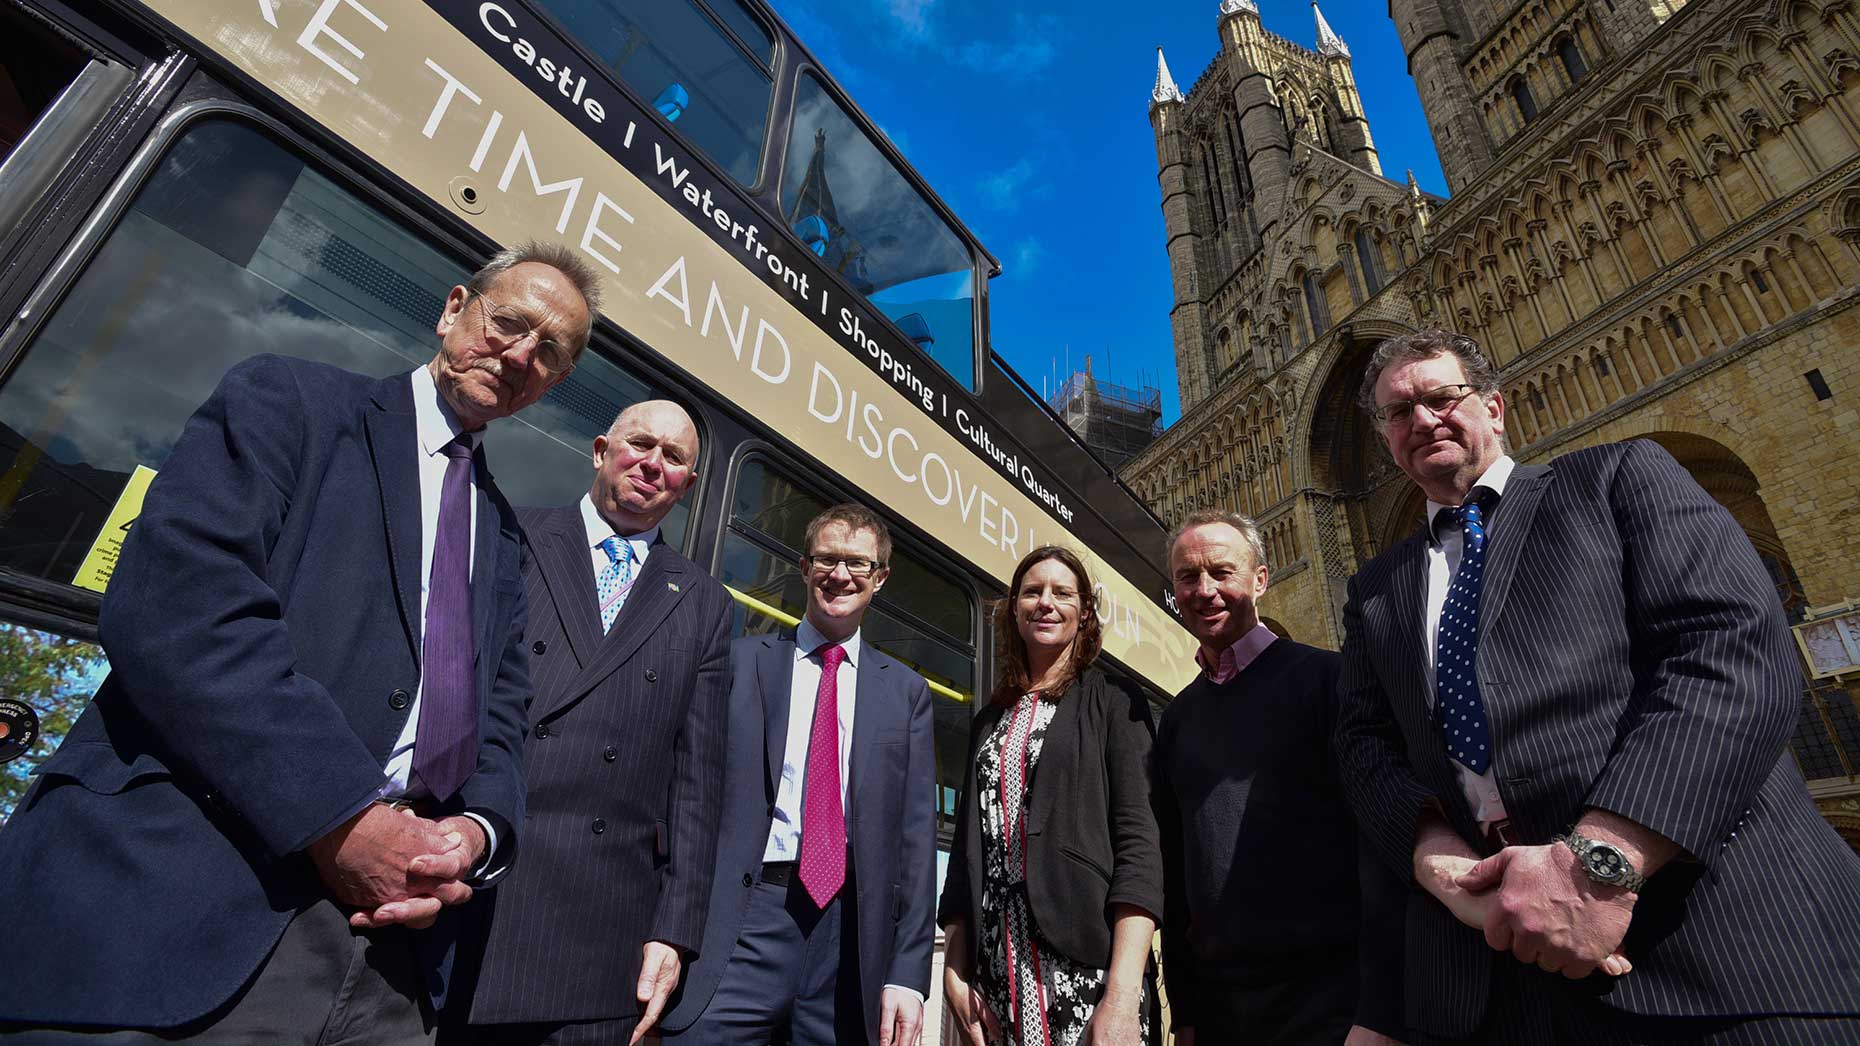 Leader of the City of Lincoln Council Ric Matcalfe, Lincolnshire County Councillor Colin Davie, David Horne of Virgin Trains East Coast, Emma Tatlow from Visit Lincoln, Michael Armstrong, John Plumridge from the University of Lincoln. Photo: Steve Smailes for The Lincolnite